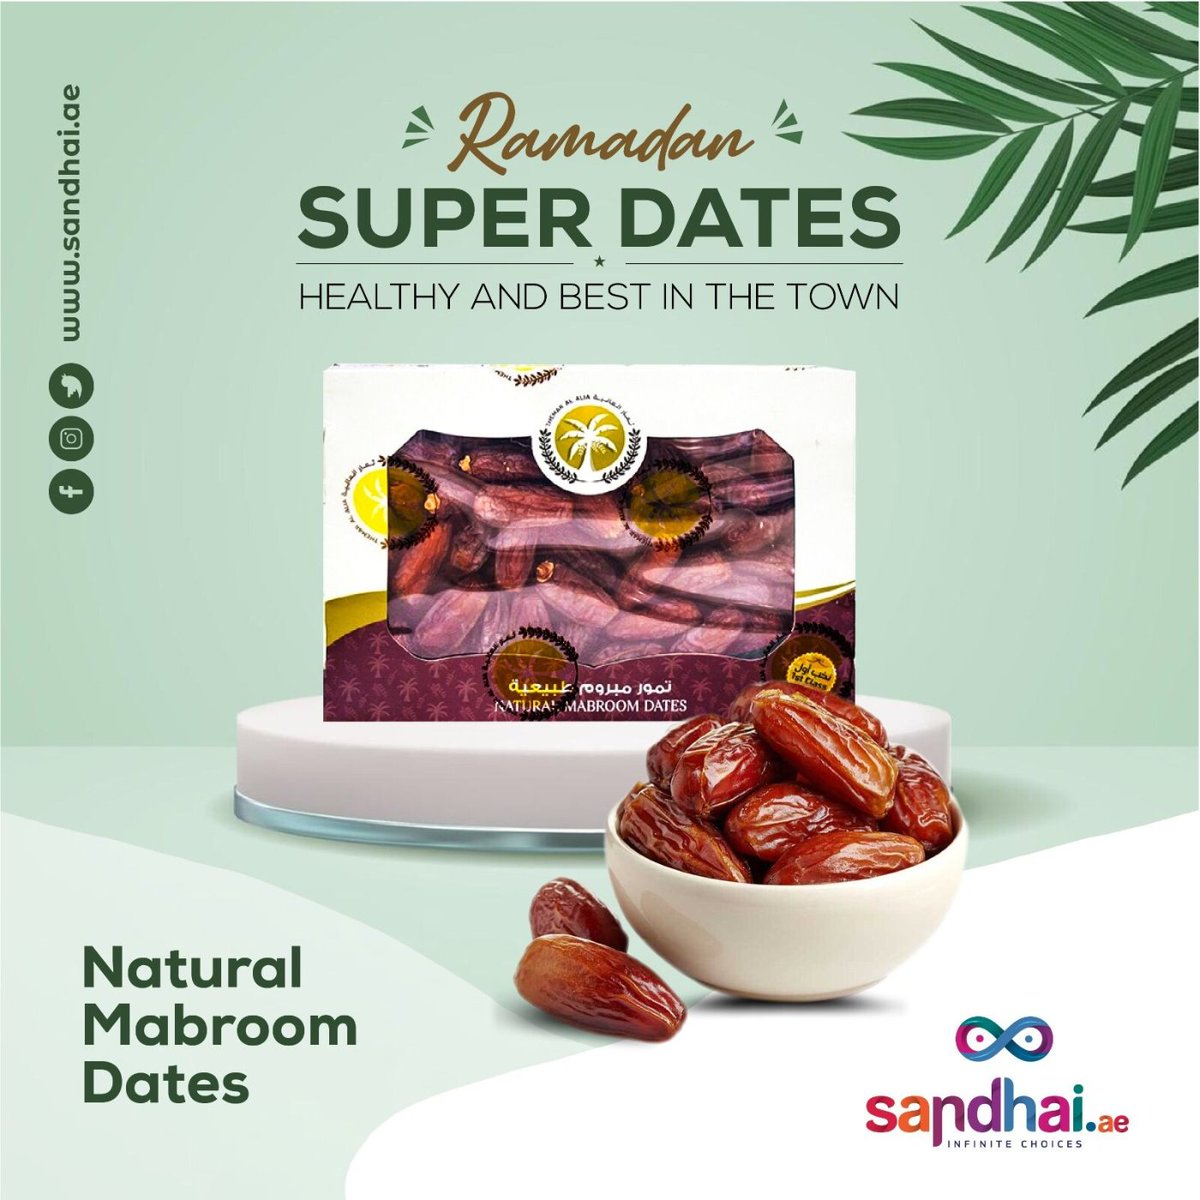 Craving something sweet but healthy? Try dates! 🌴 Perfect snack, full of nutrients to boost your day. Let's make healthier choices together. 
Order Now>> bit.ly/3VeZ7qE

#HealthyEating #DatesLove #SnackSmart #dryfruits #dryfruitbox #dryfruits #dryfruit #dryfruitsonline